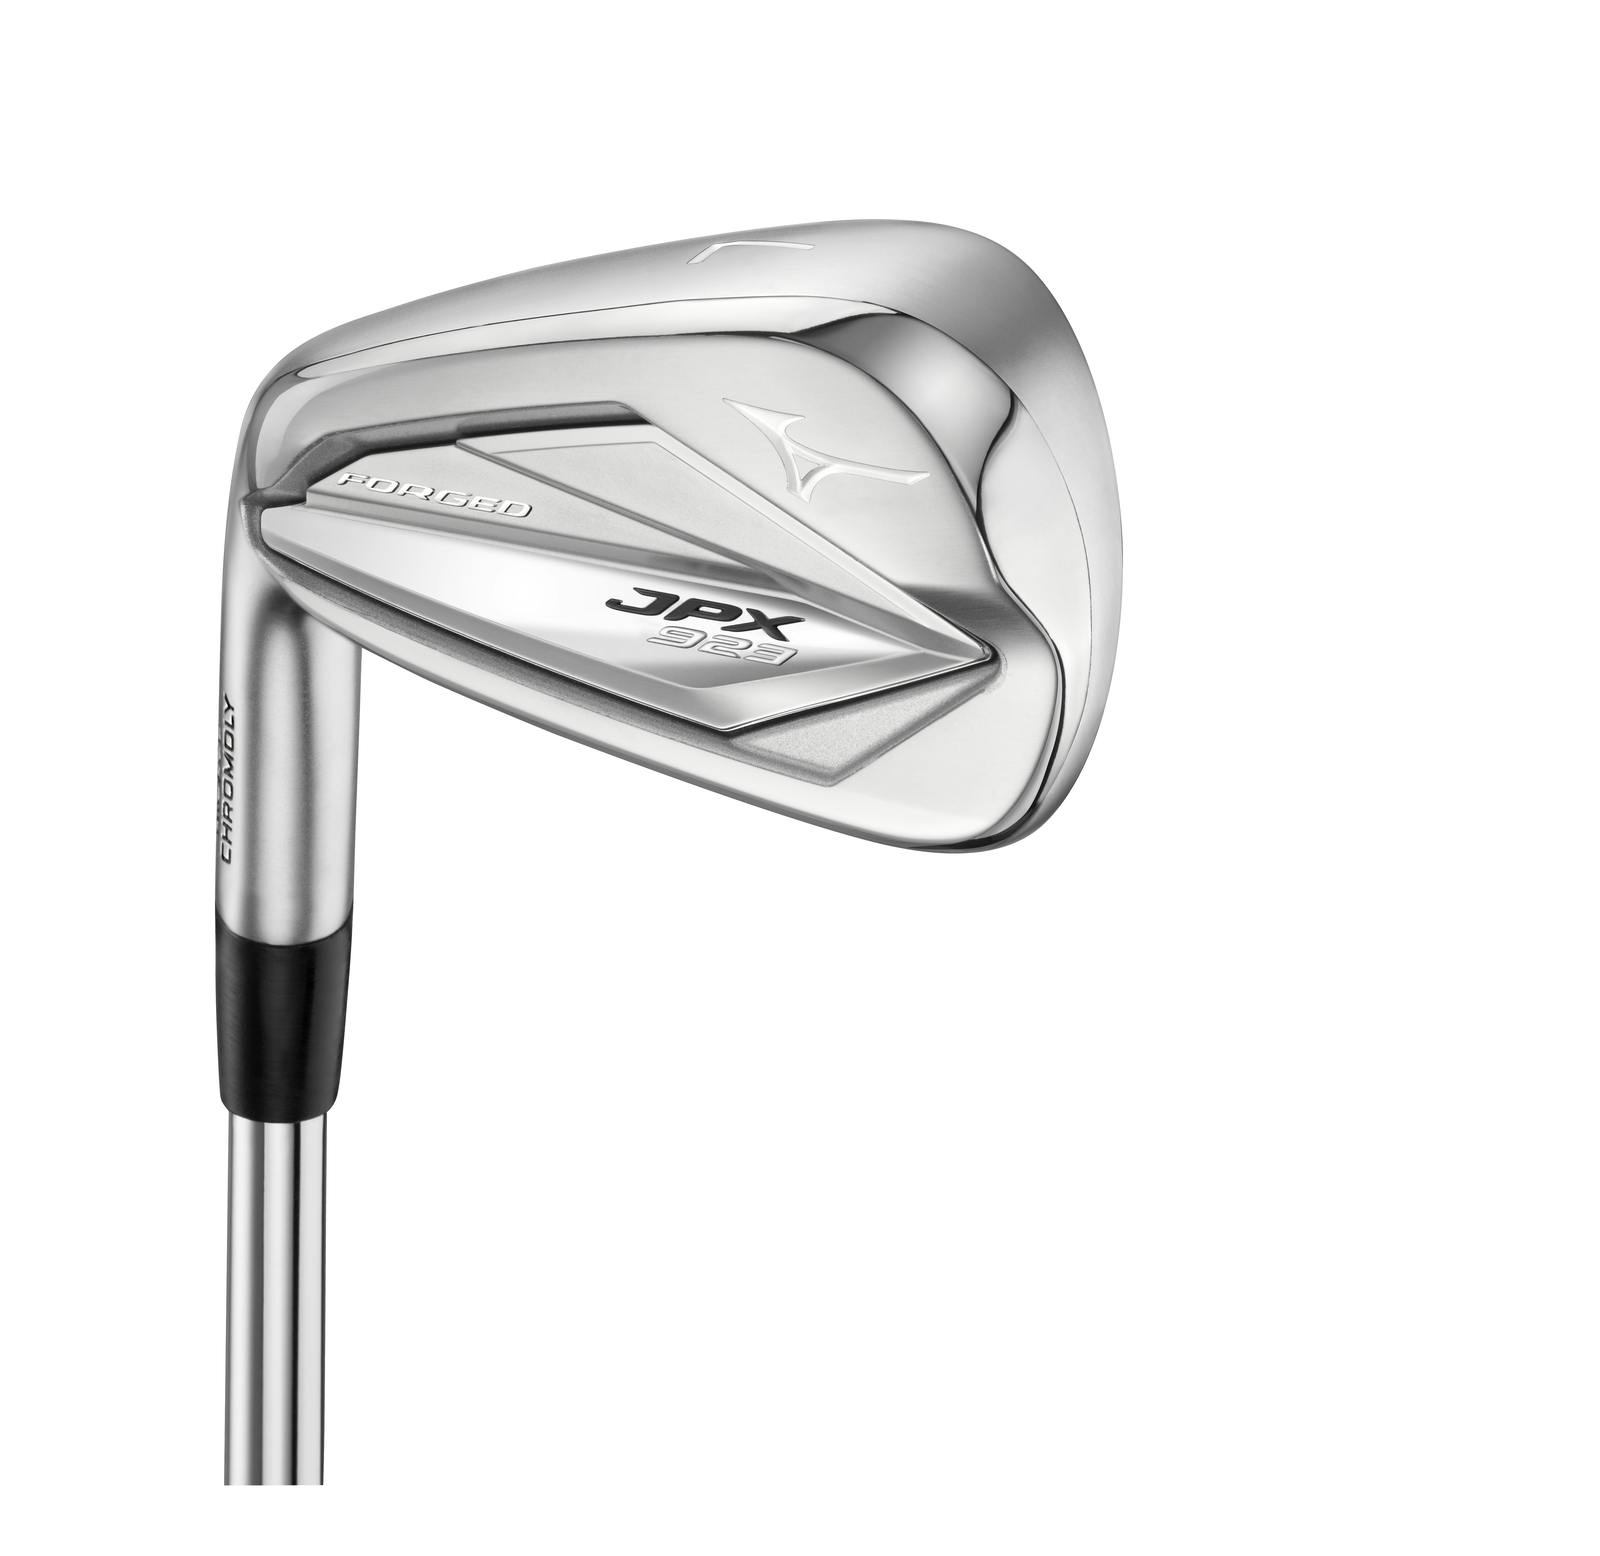 Mizuno JPX923 Forged Irons · Left handed · Steel · Stiff · 4-PW